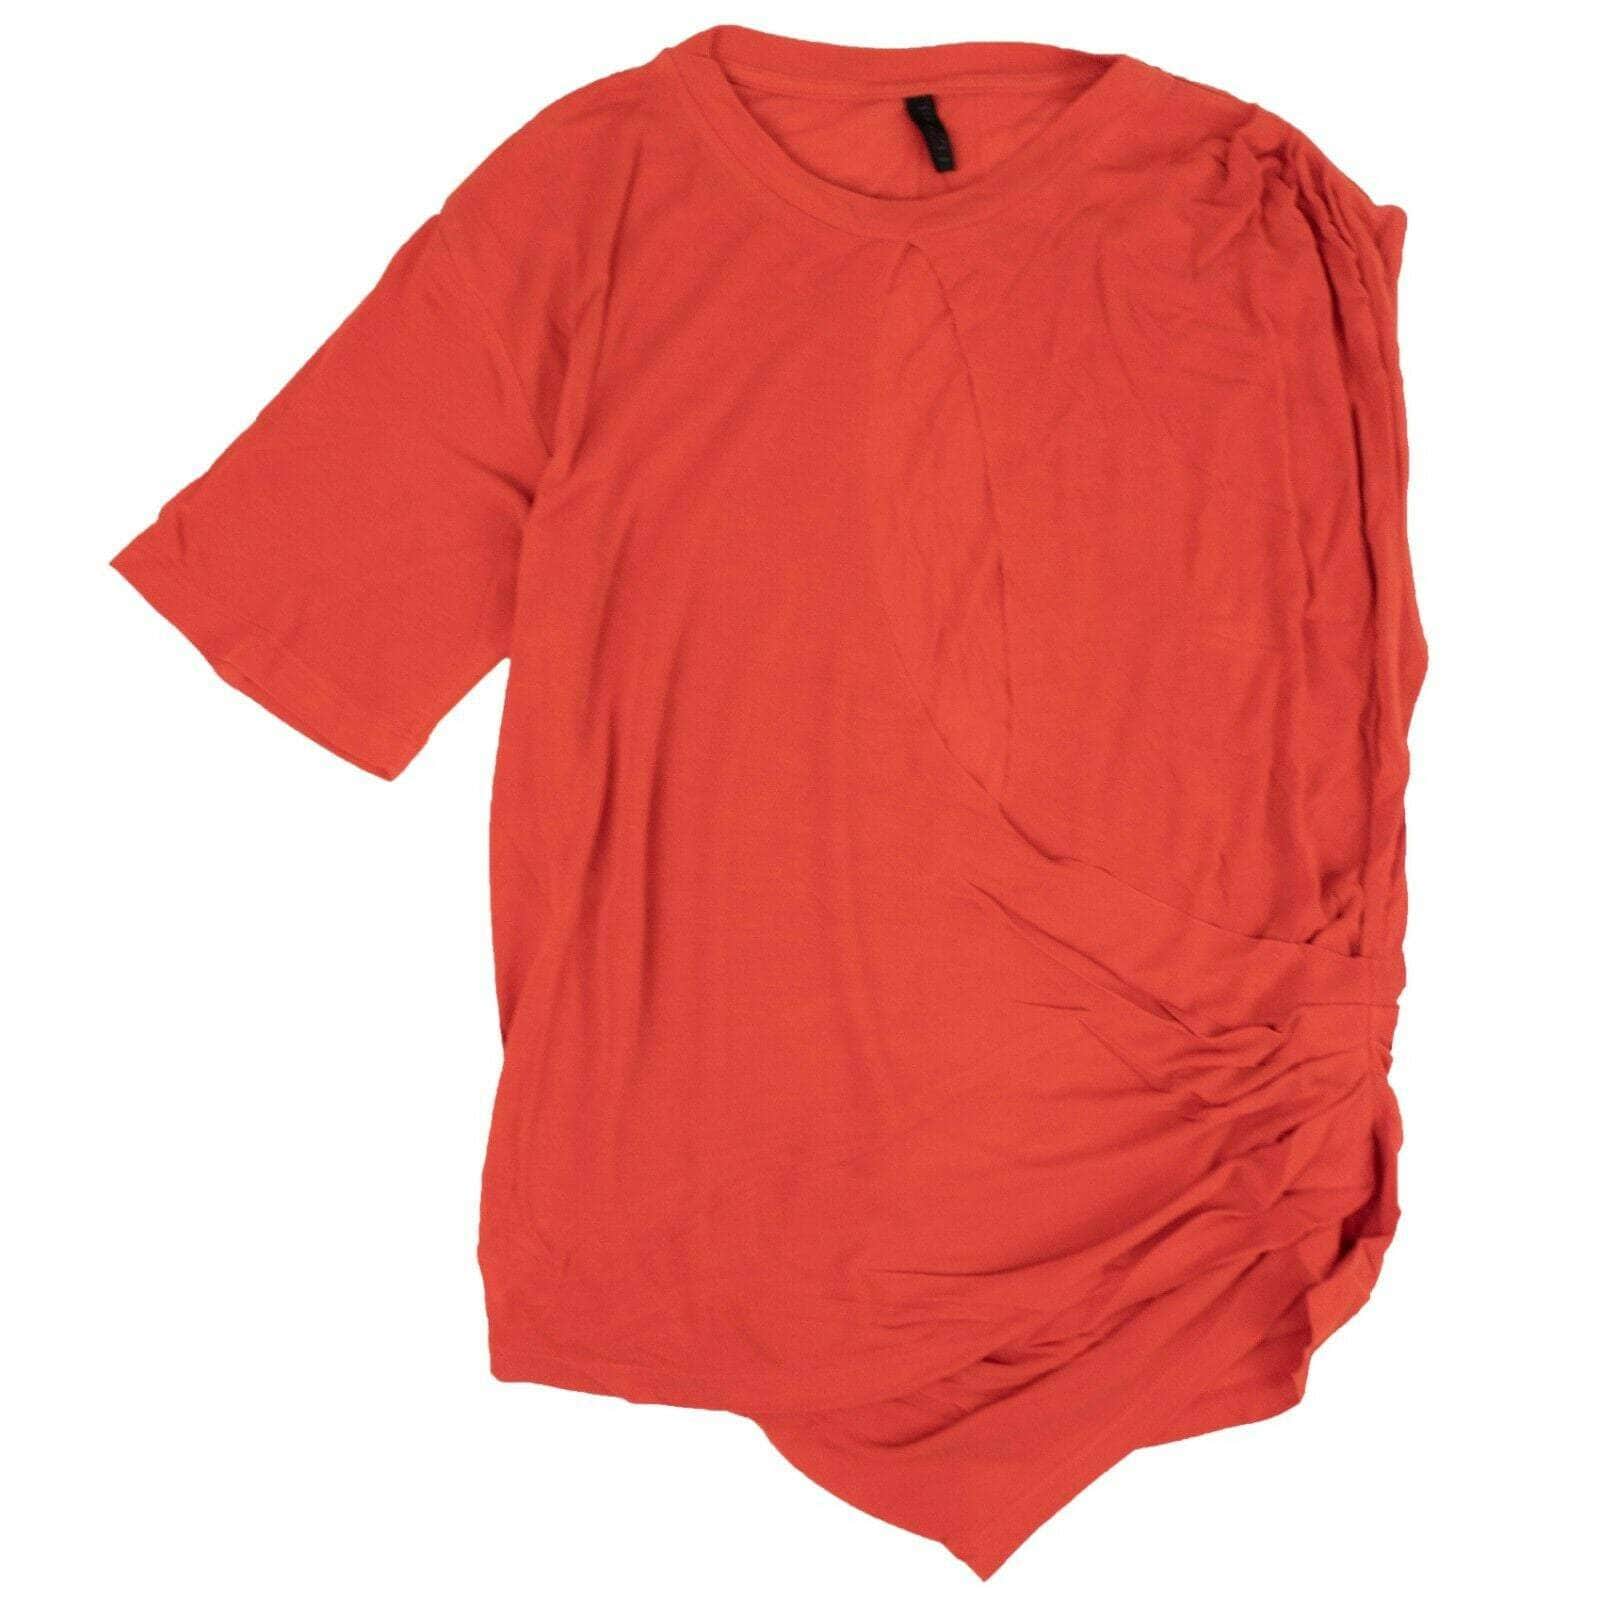 UNRAVEL PROJECT channelenable-all, couponcollection, gender-womens, main-clothing, sale-enable, size-m, size-s, size-xs, under-250, unravel-project Red Silk Draped T-Shirt